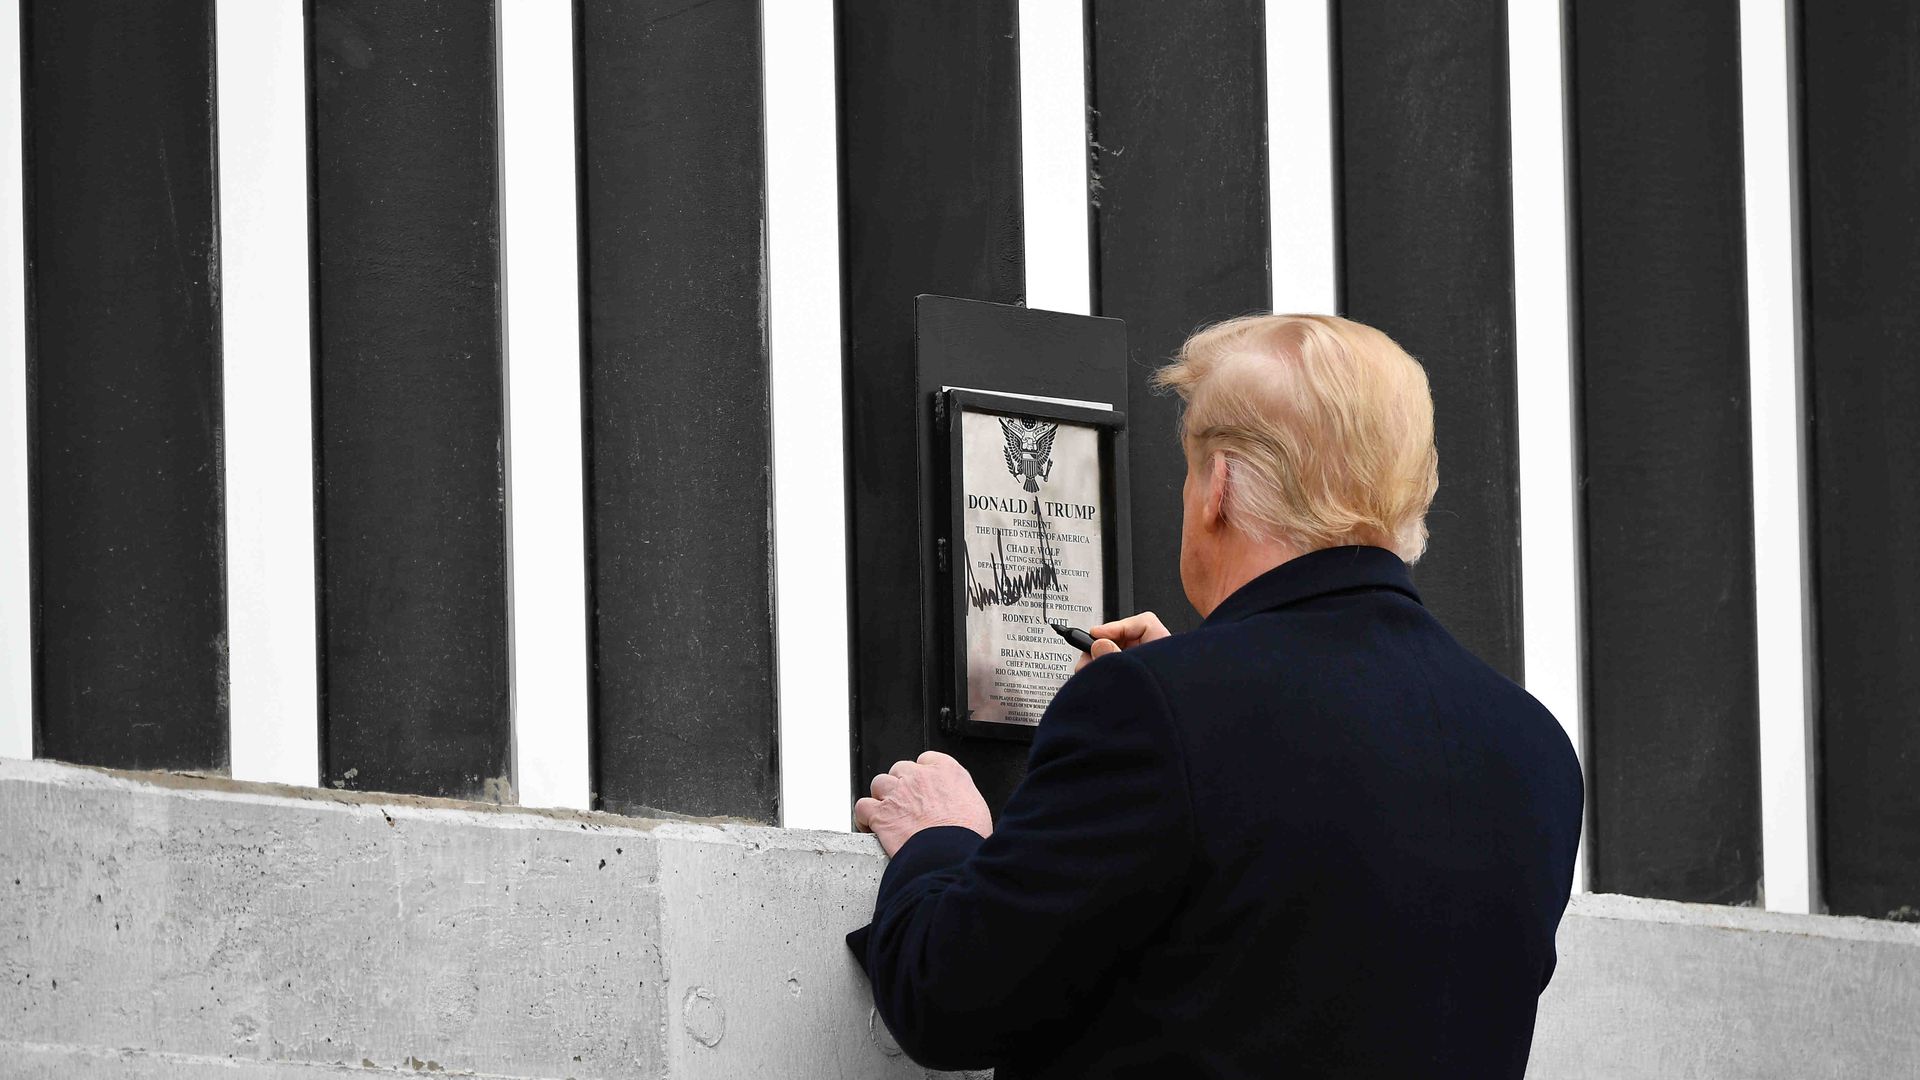 President Trump is seen signing a plaque on the U.S.-Mexico border wall on Tuesday.